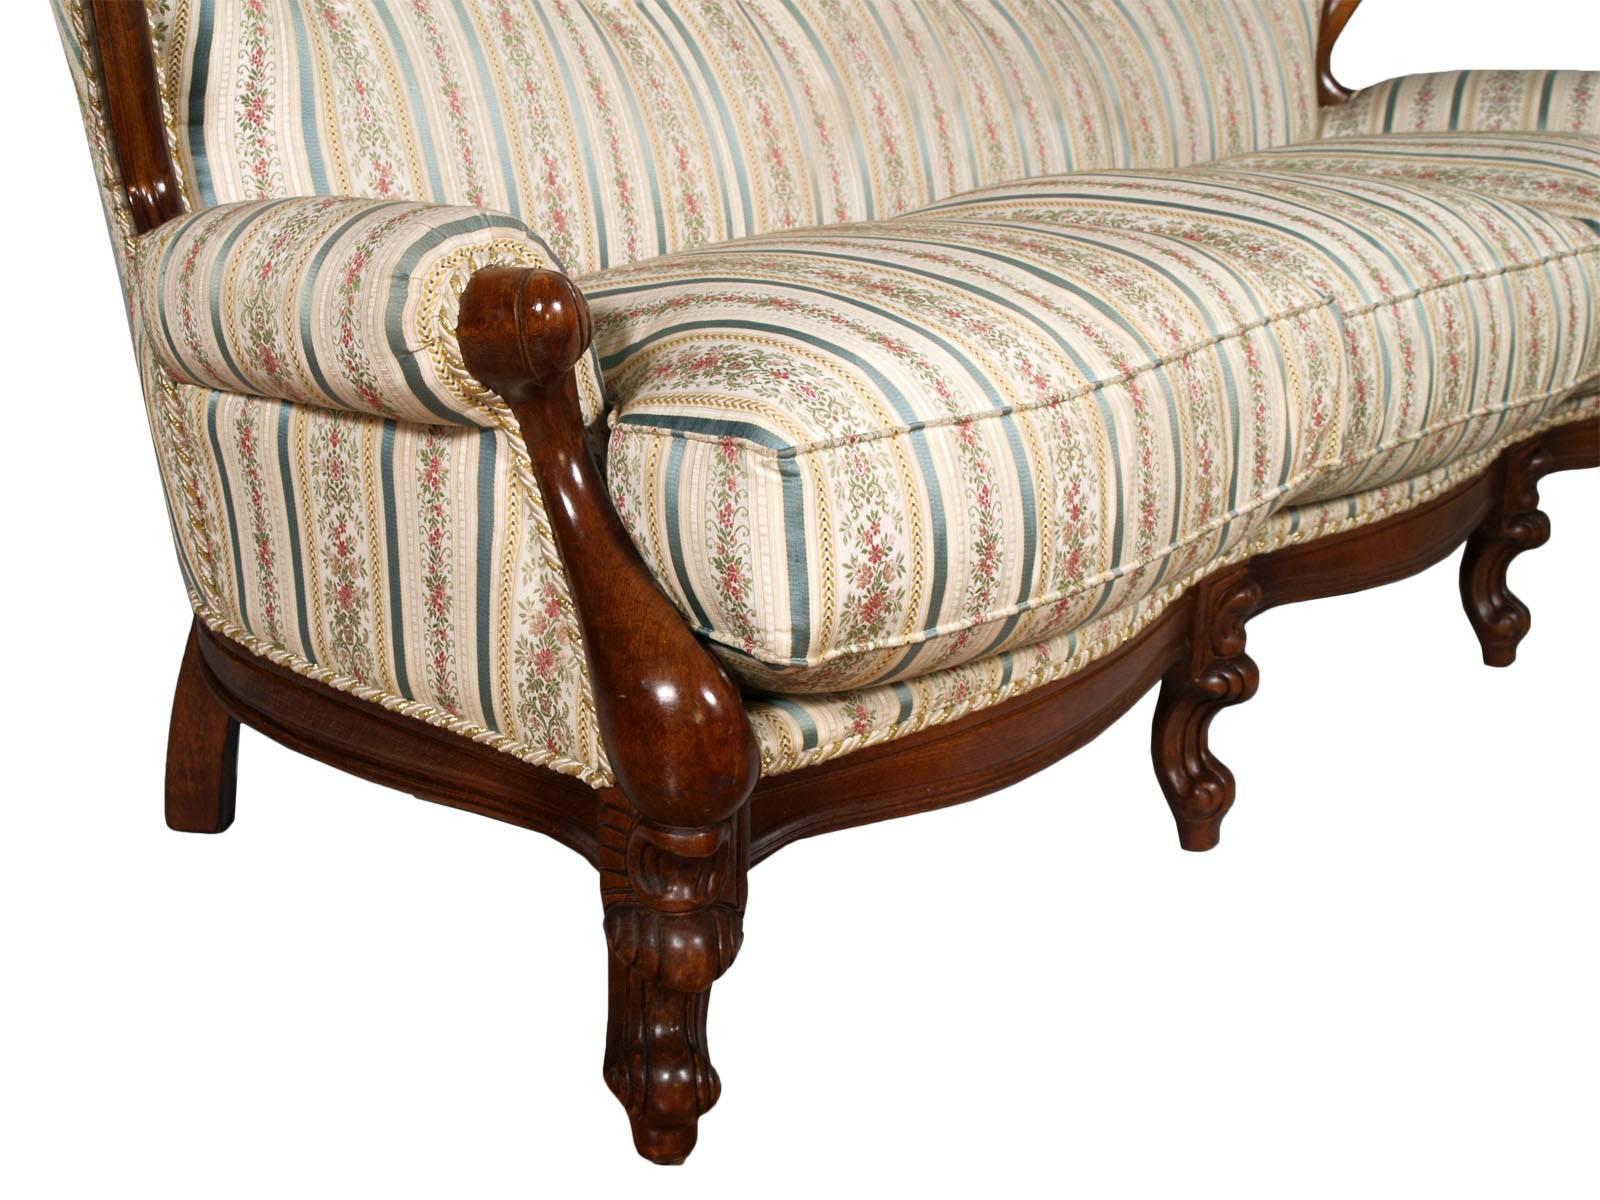 Baroque Revival 19th Century Venetian Baroque Sofa, Settee,  Hand-Carved walnut For Sale